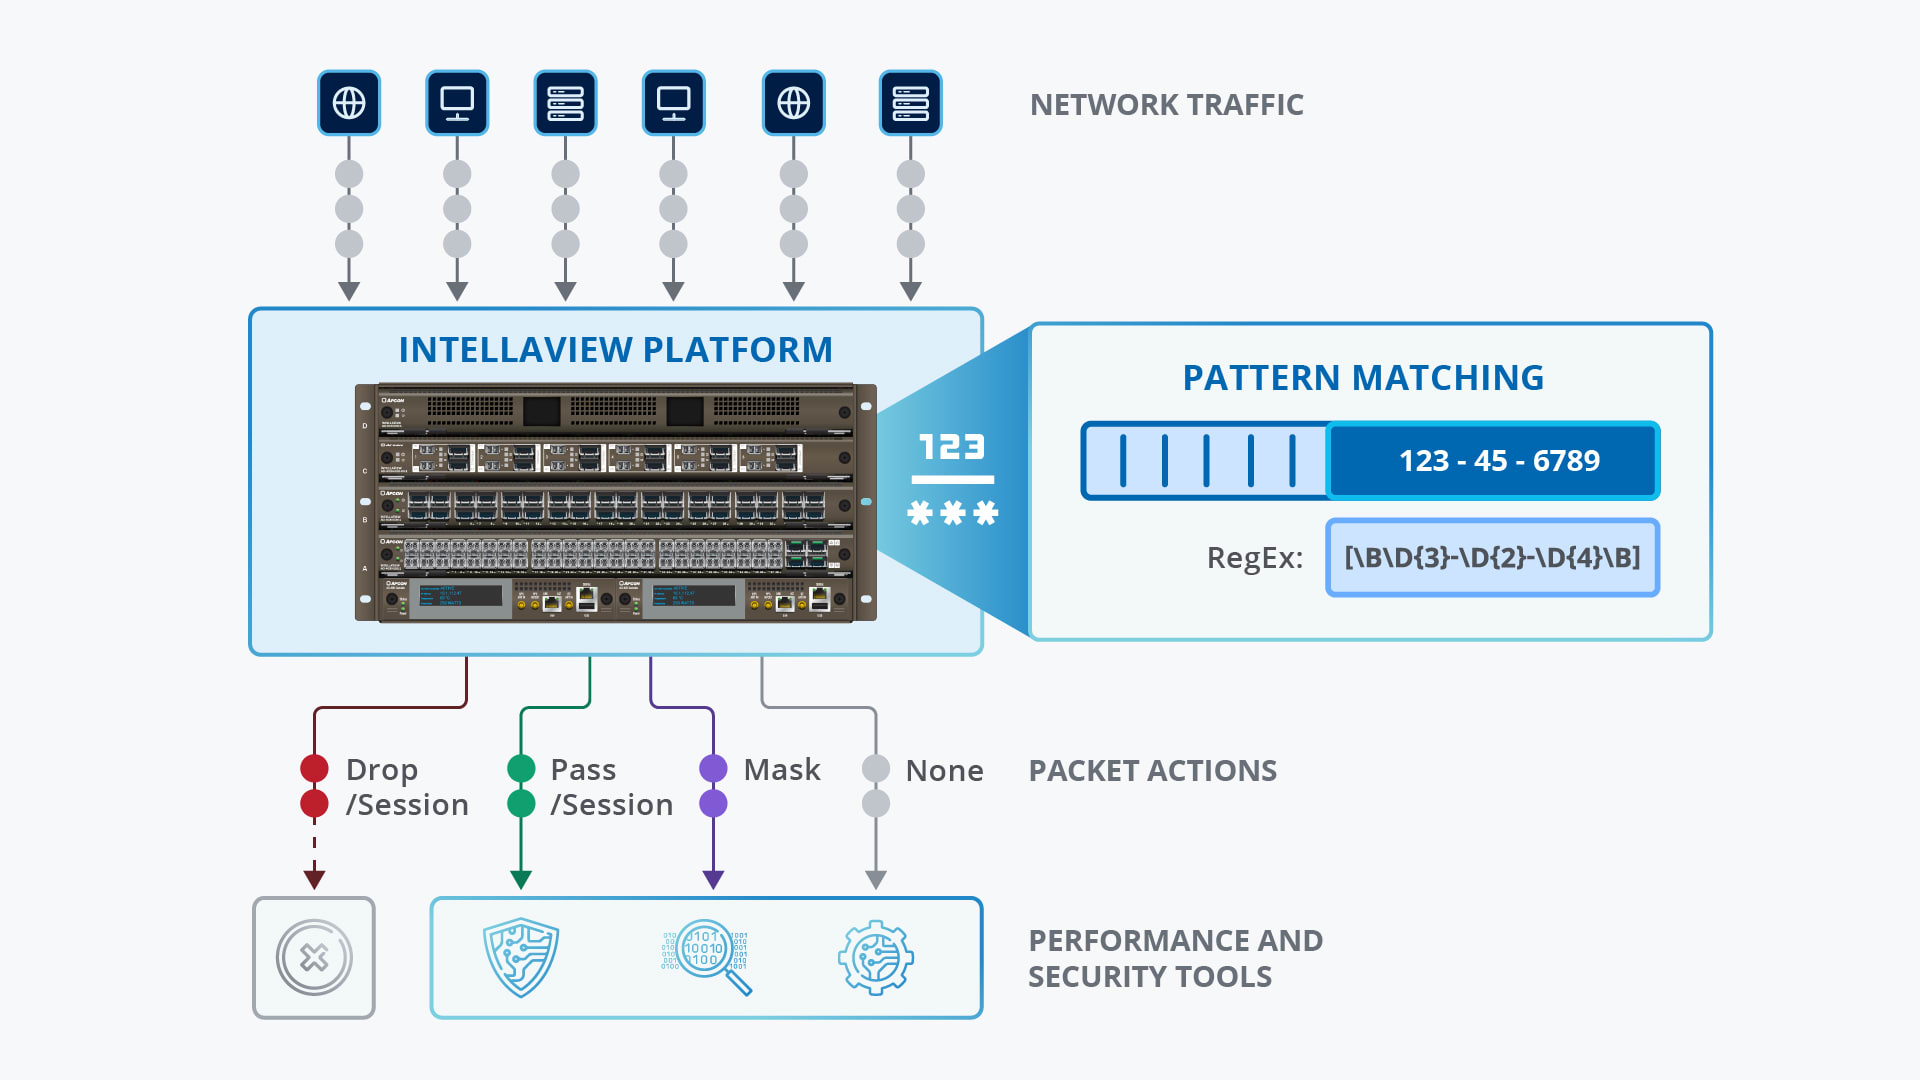 A diagram explaining Pattern Matching and how it relates to the Intellaview Platform.